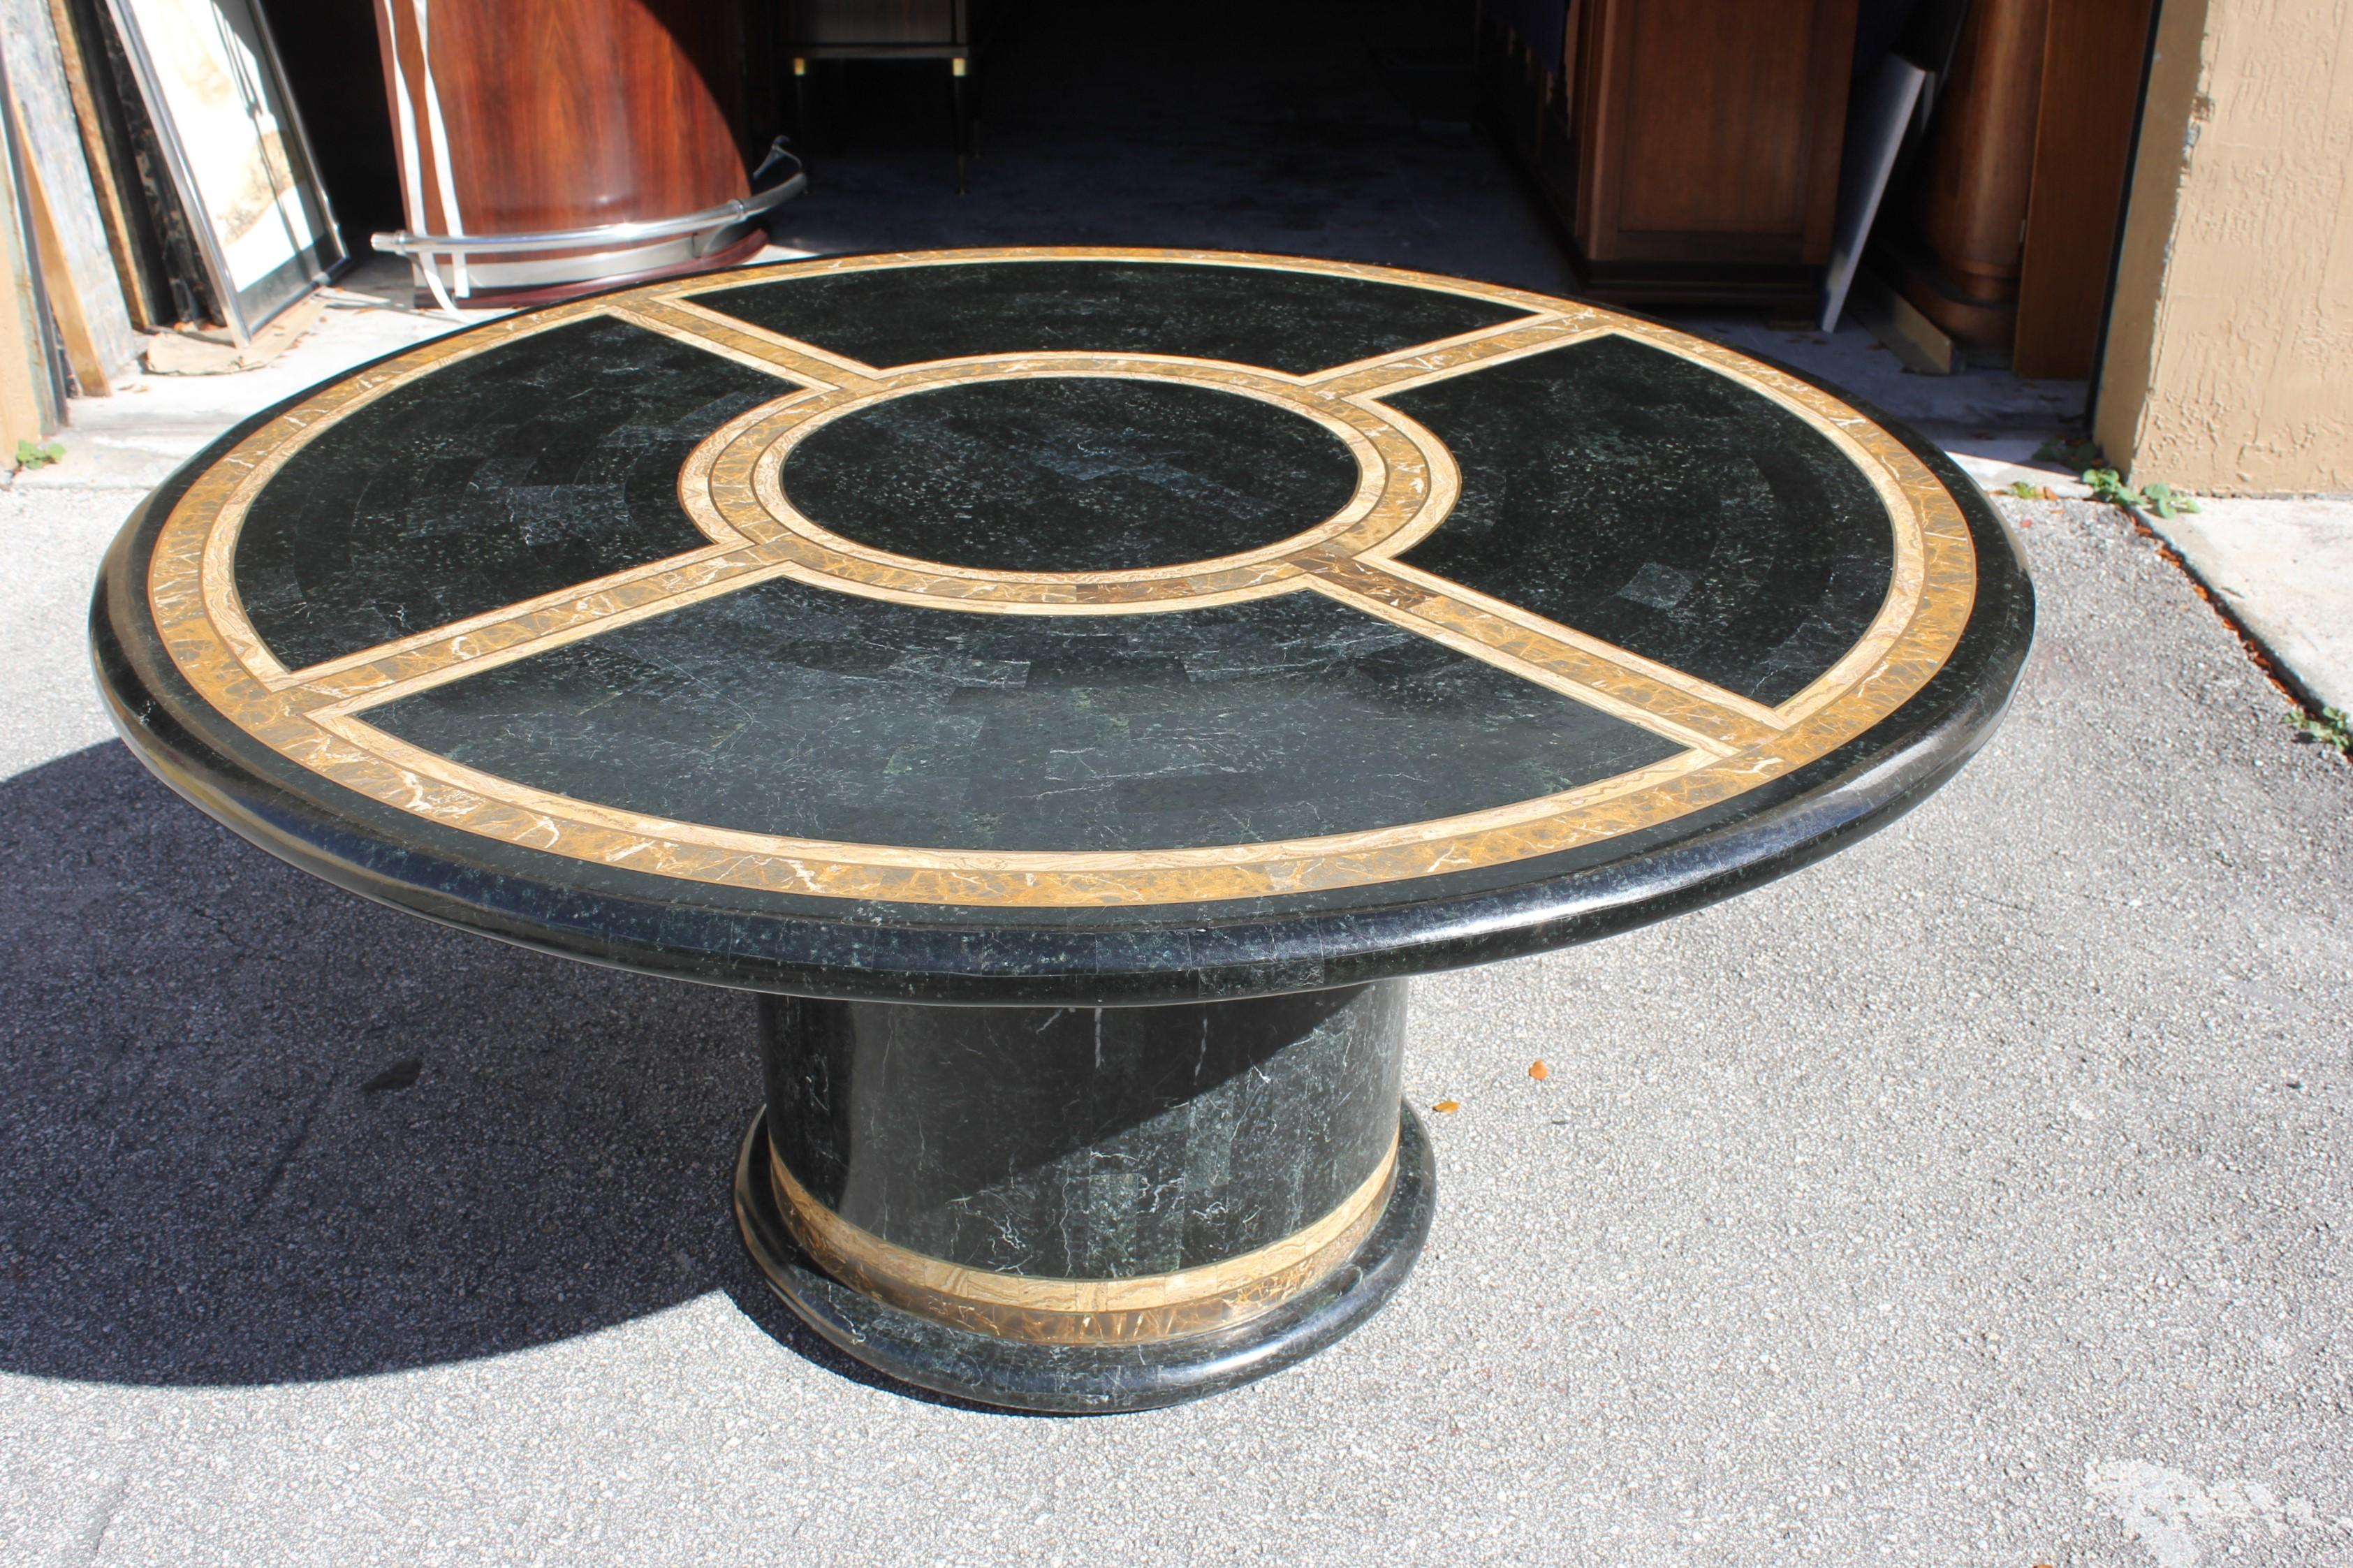 Monumental Mid-Century Modern Maitland Smith tessellated stone Round dining table or center table Made in the 1970s.The dining or center table is beautiful with three color of tessellated stone. Brown color and dark green color and light brown